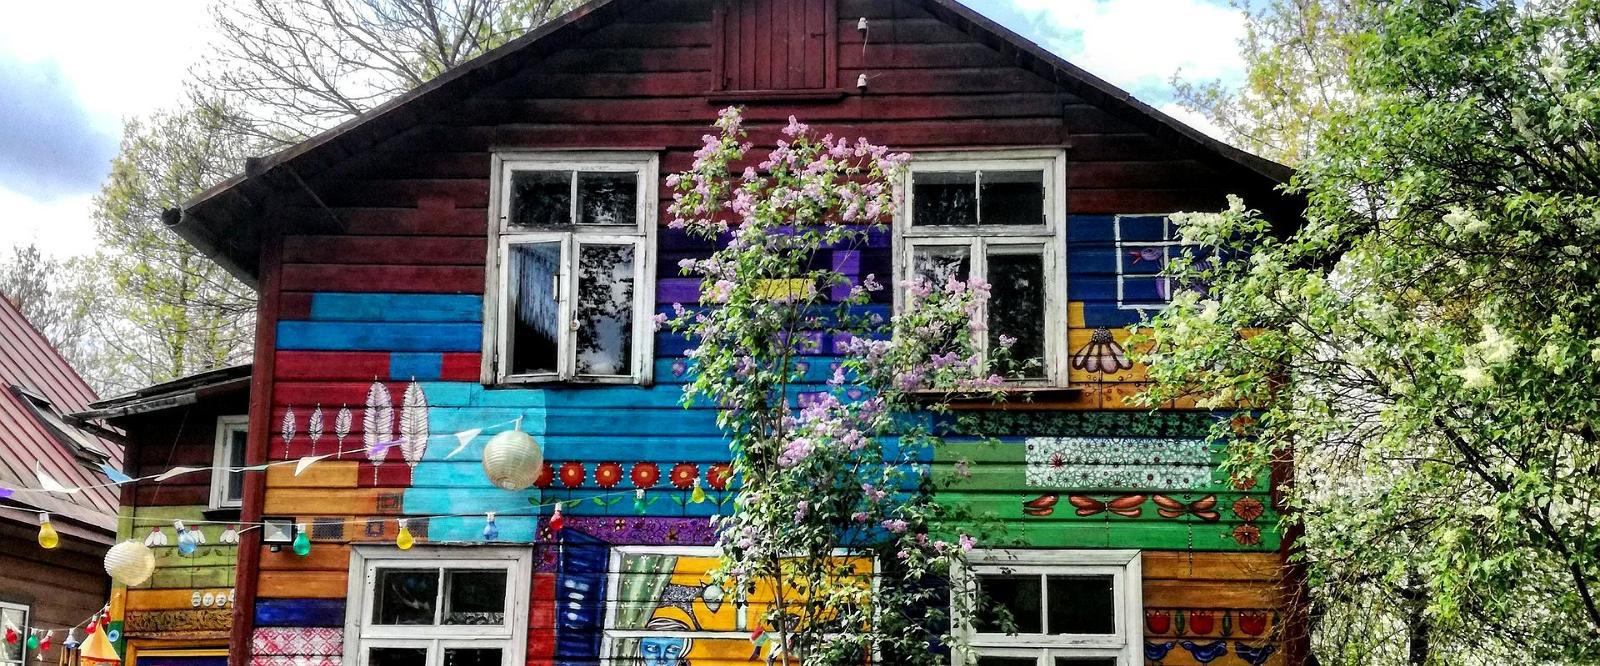 Virtual tour of the city of Tartu: Supilinn, full of unique wooden houses and street art